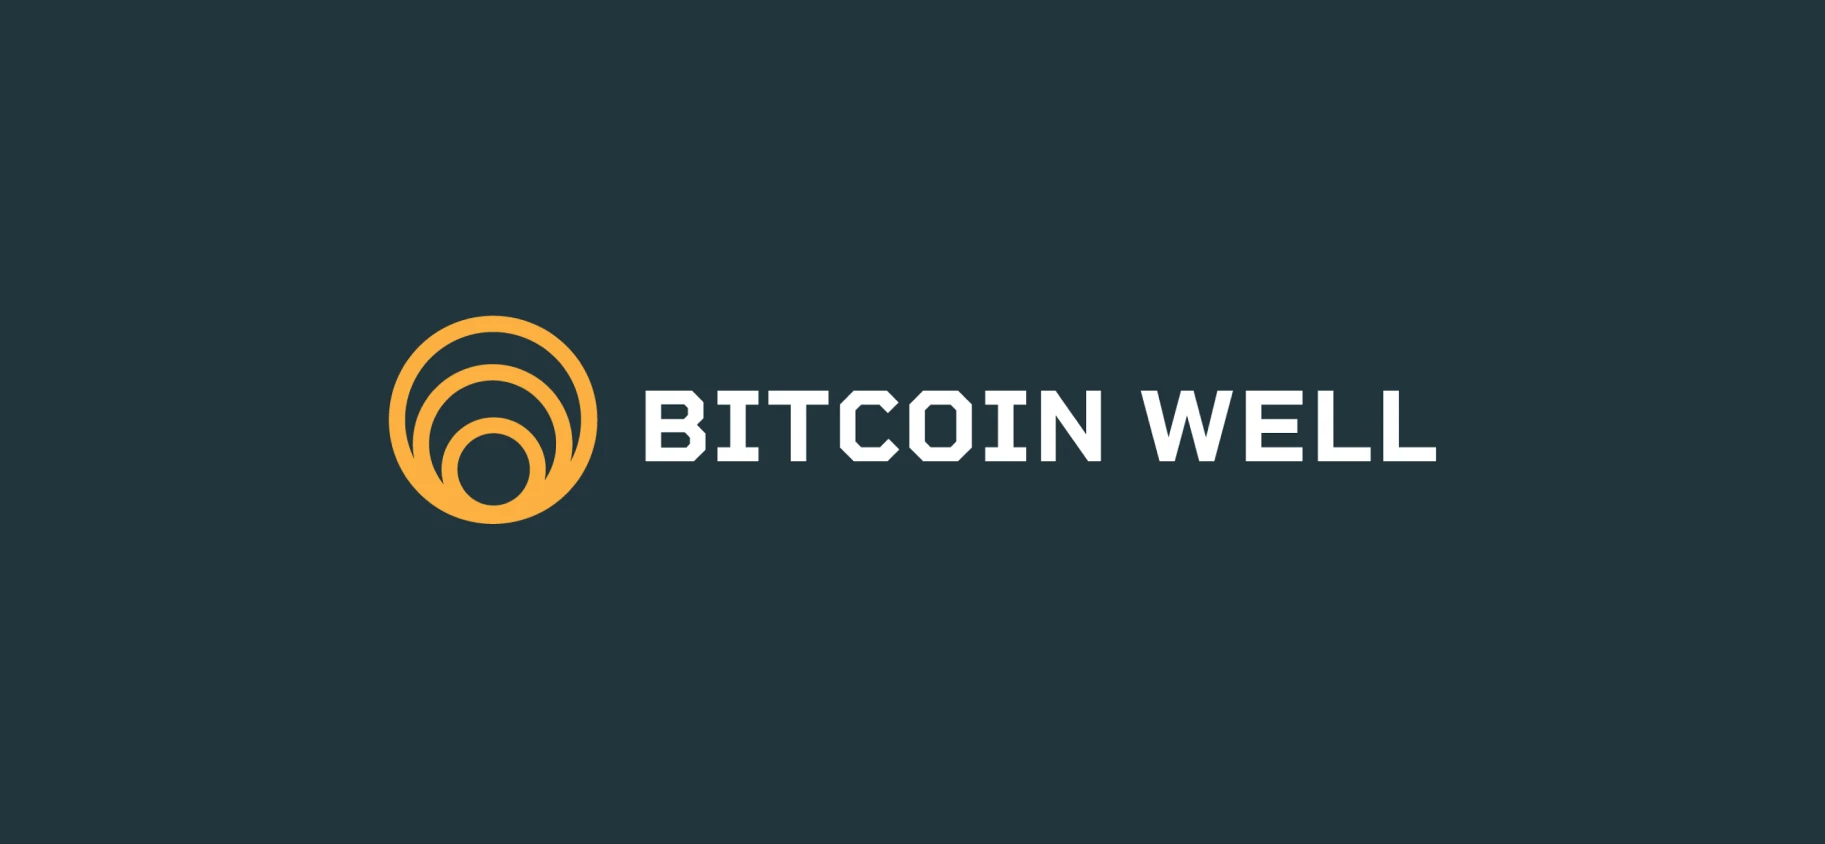 BITCOIN WELL Review